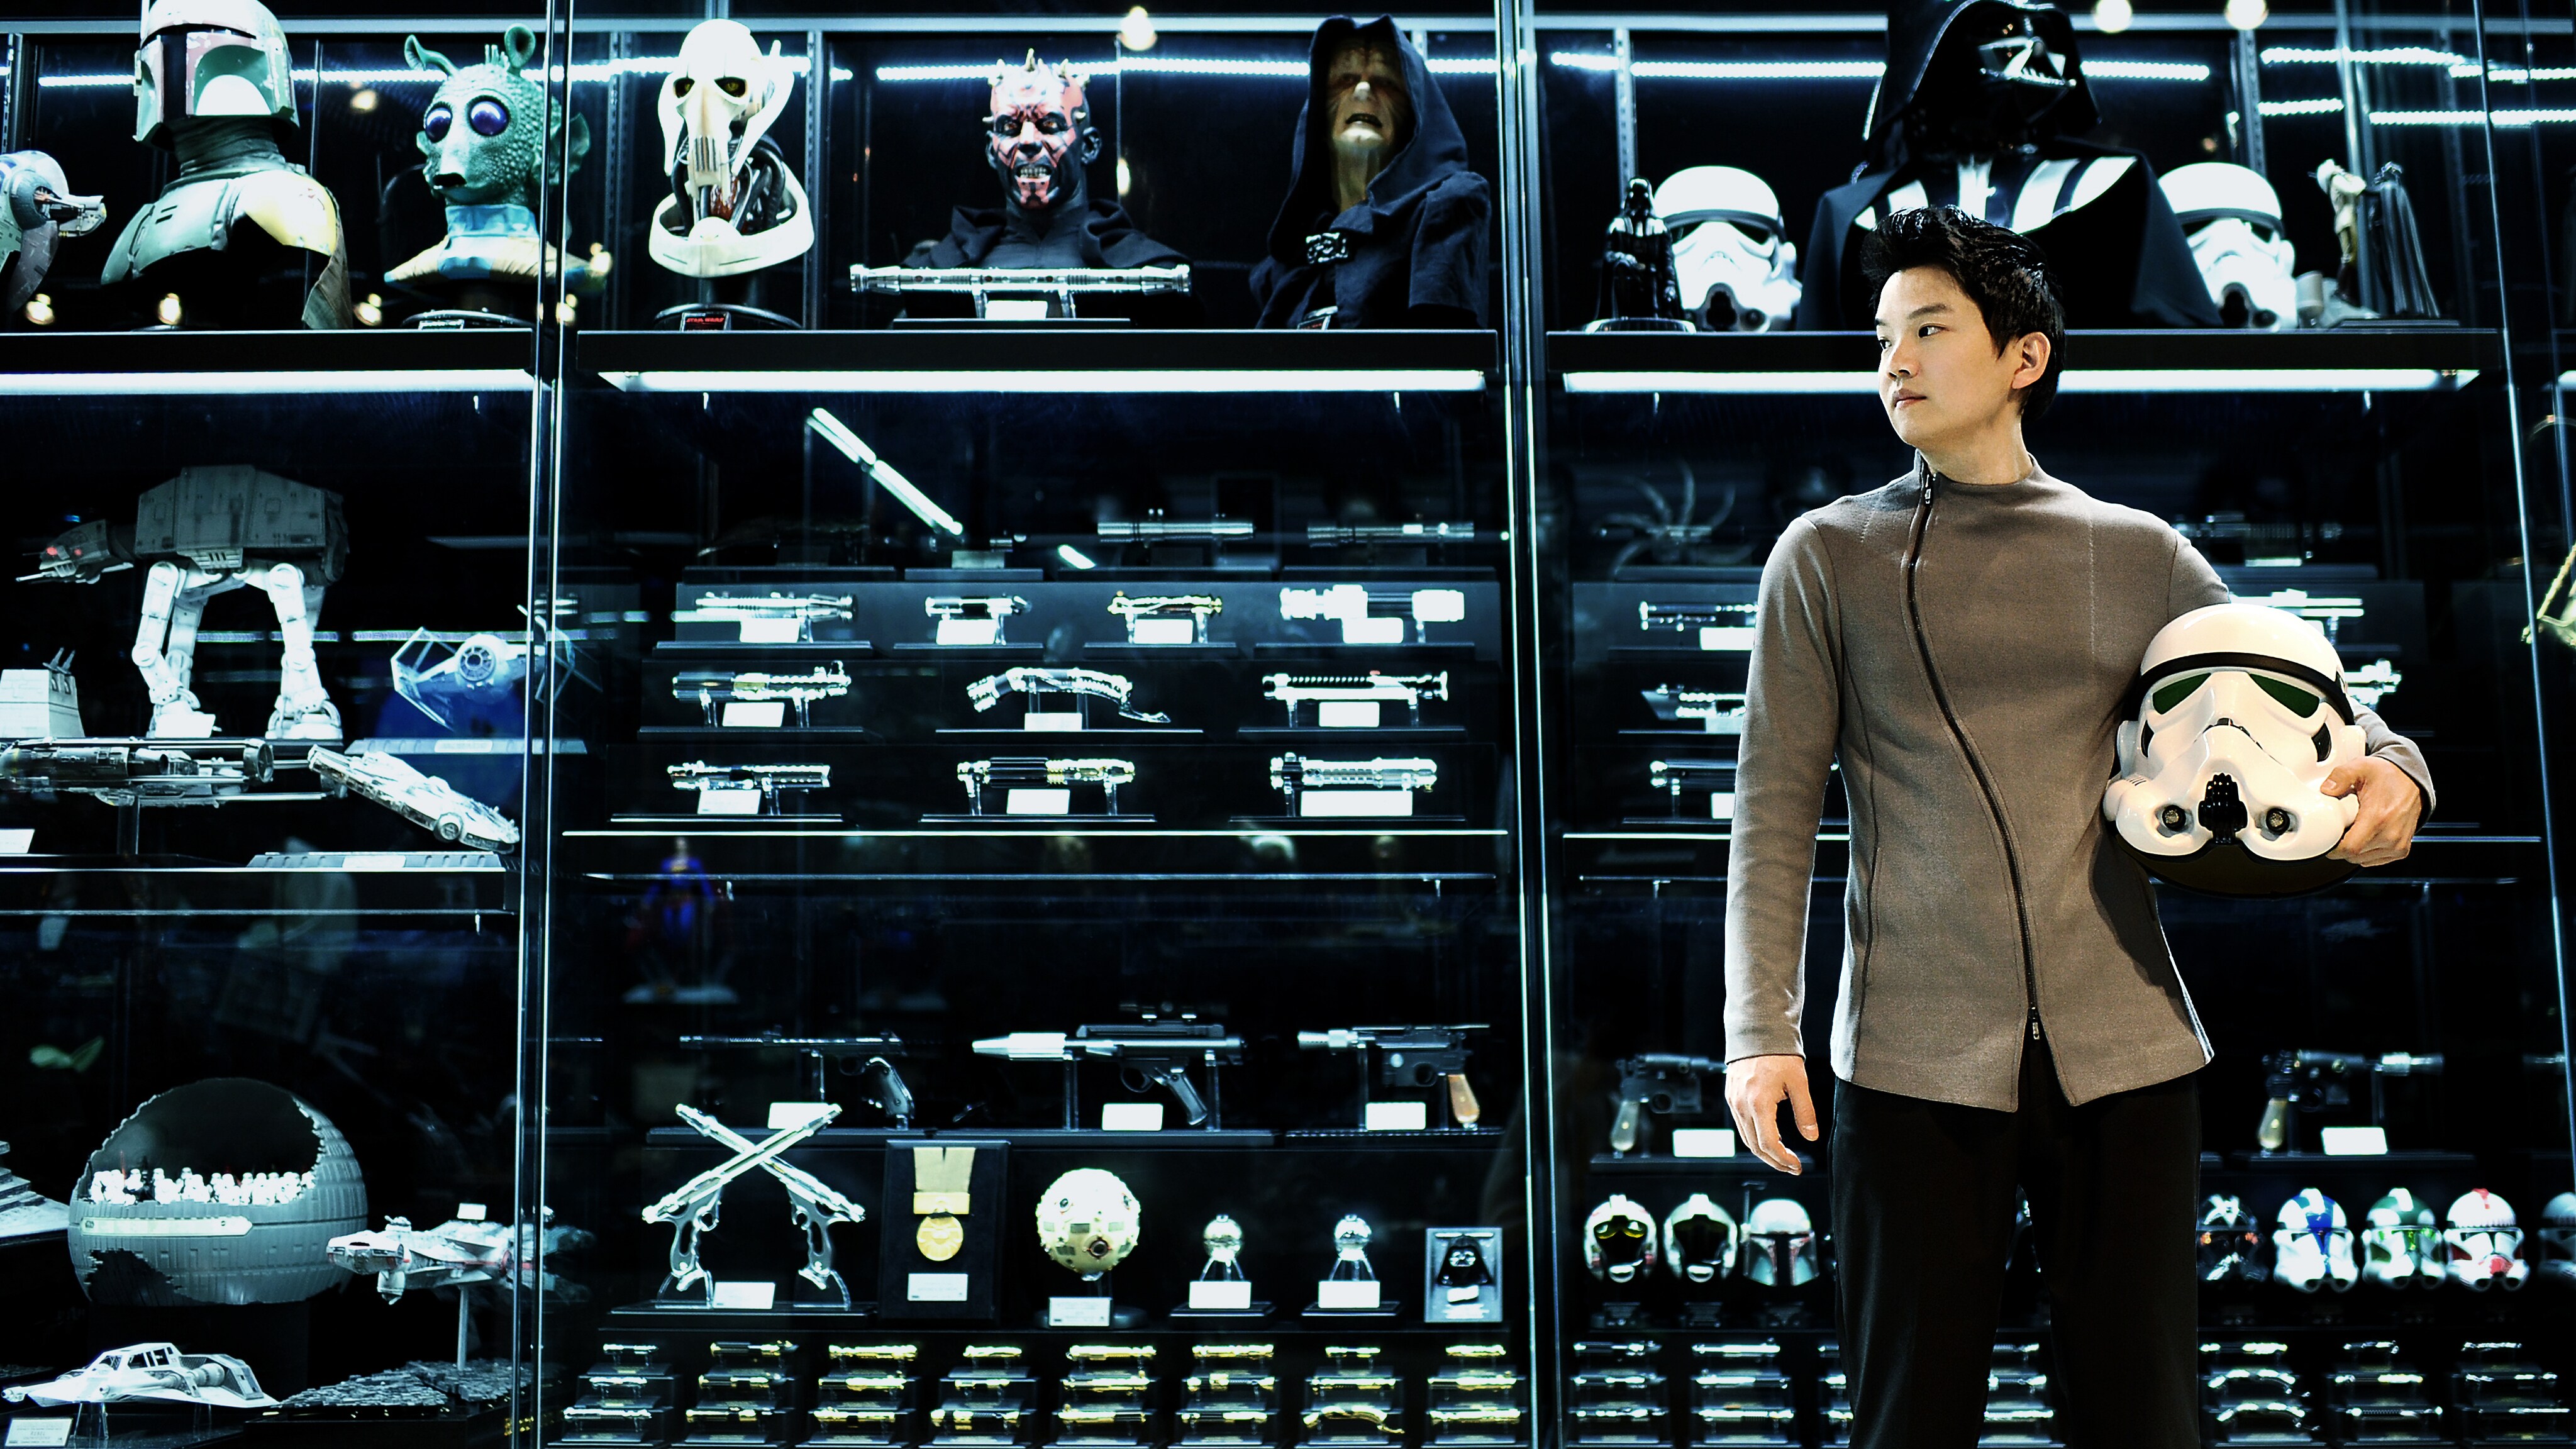 Fully Operational Fandom: Inside Cho Woong’s Amazing Star Wars Collection